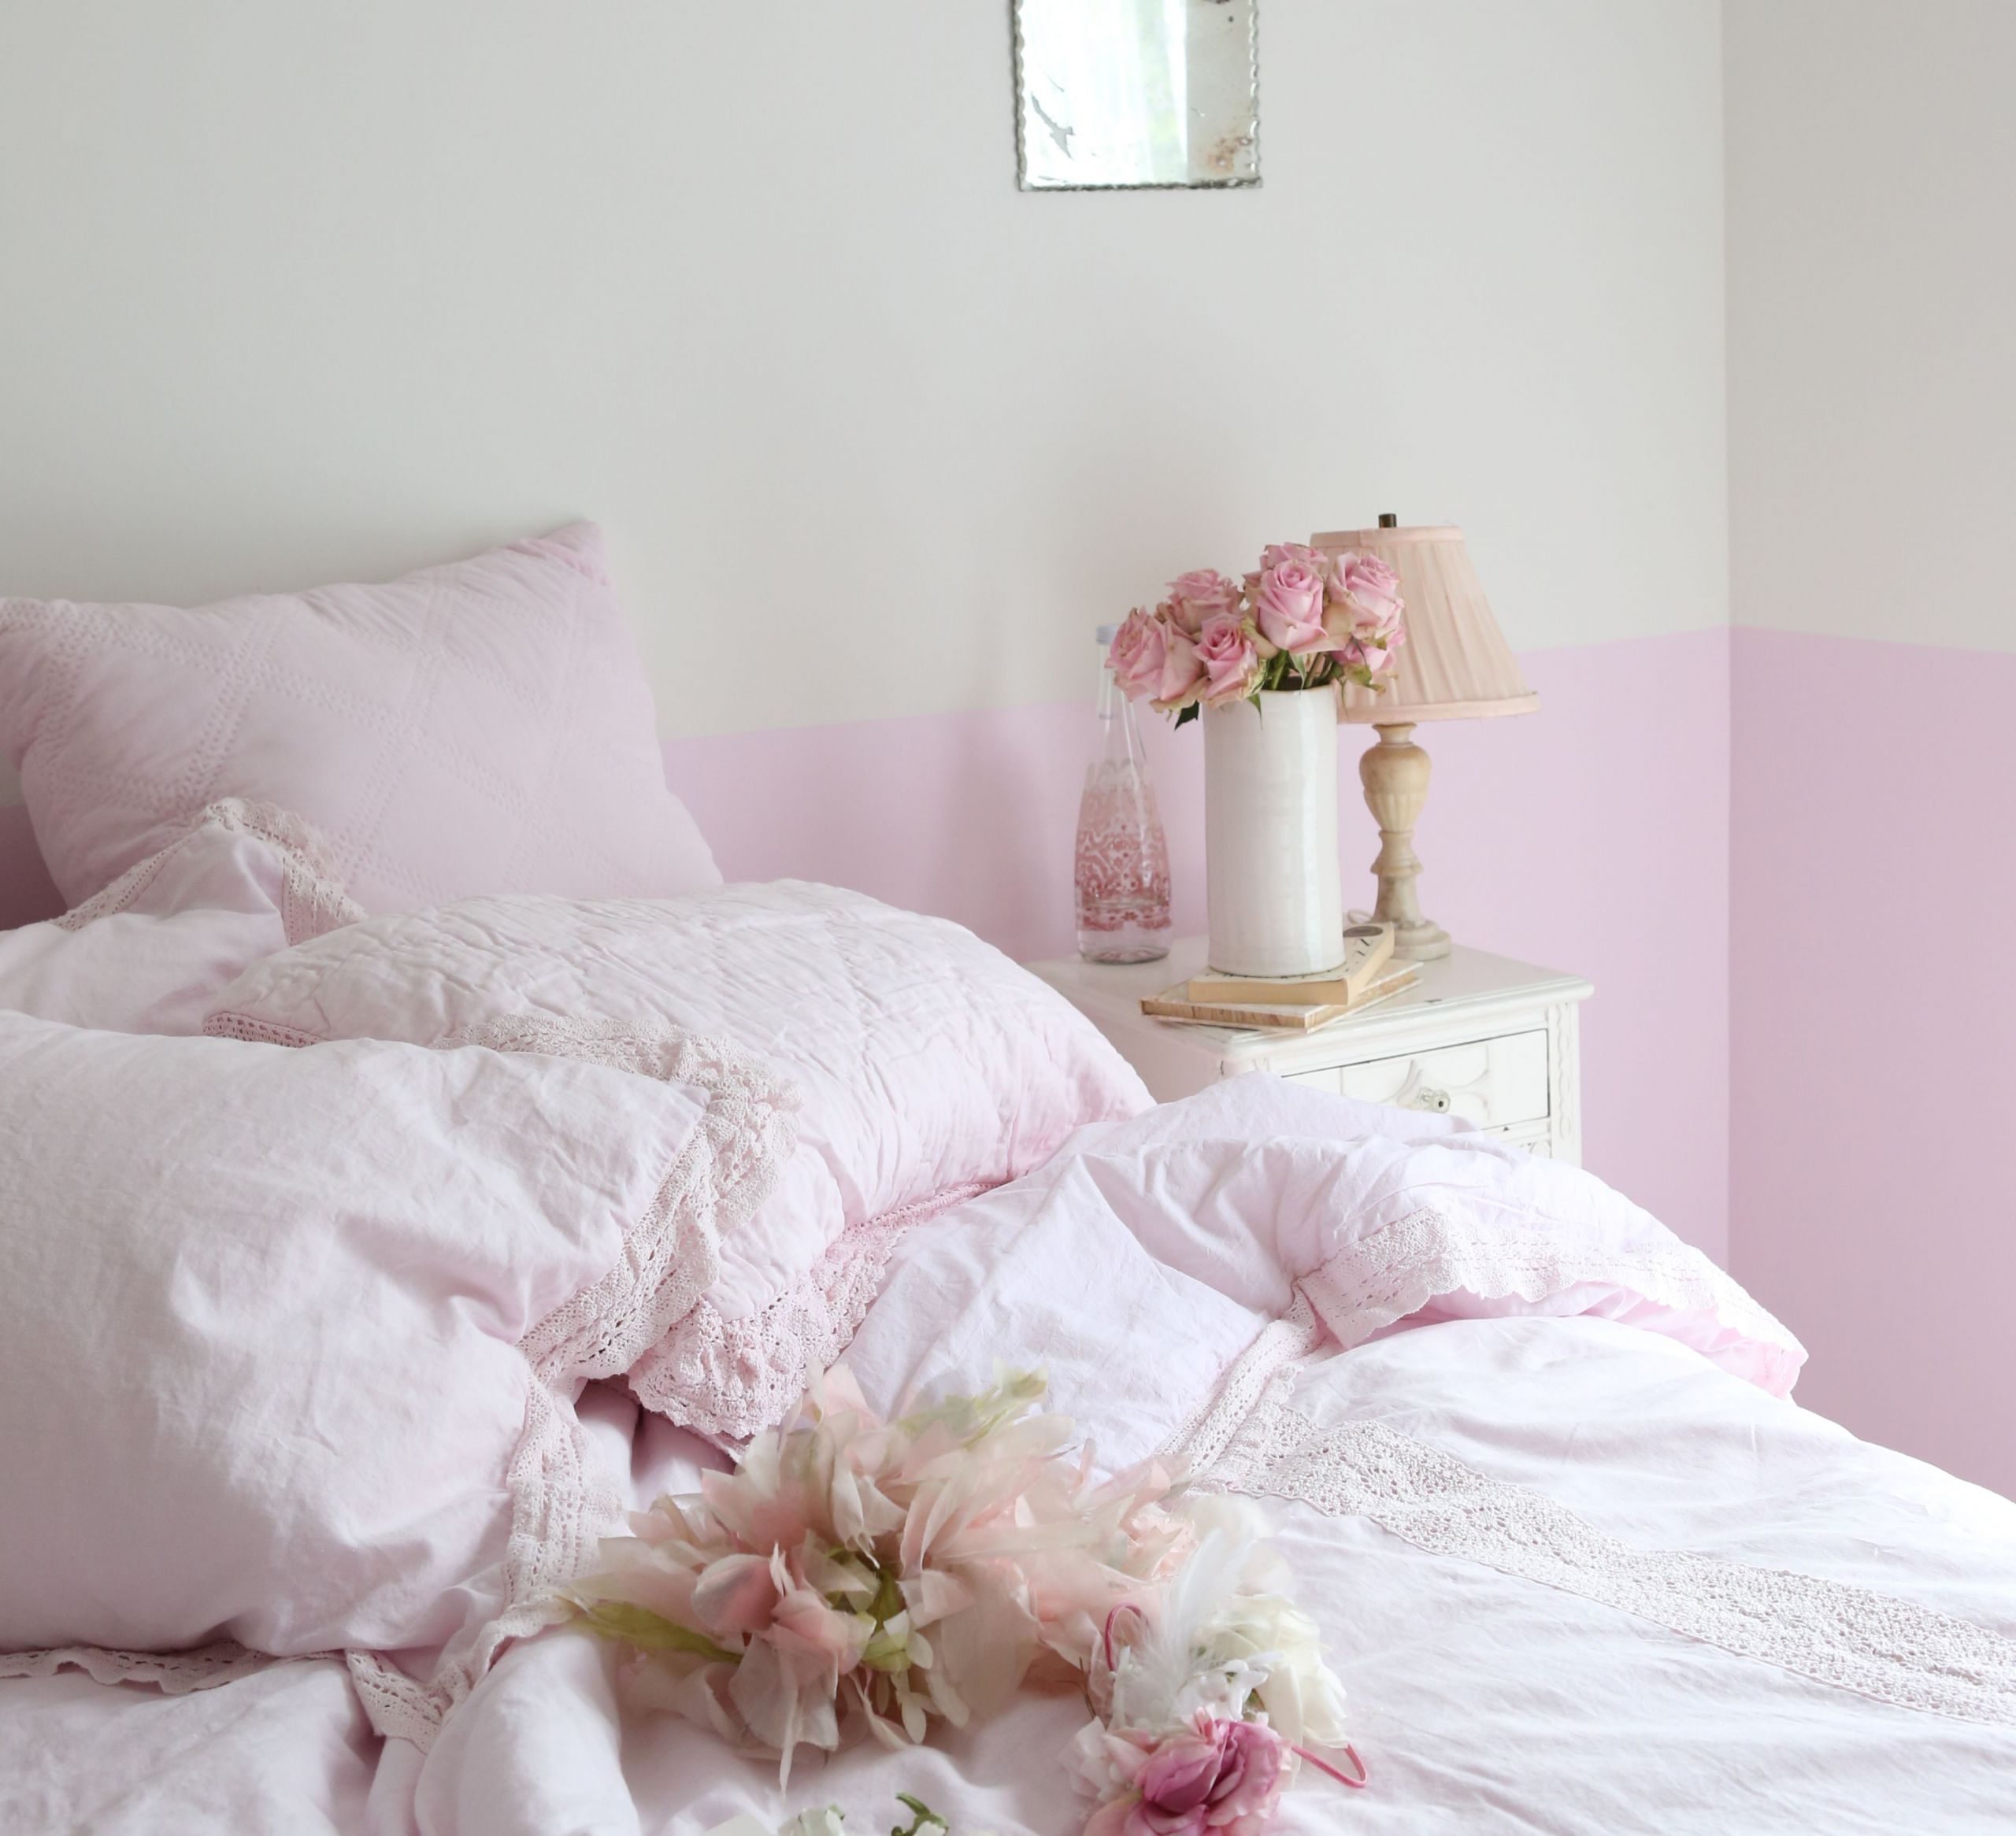 Pink Shabby Chic Bedroom
 Pretty Pink Bedroom Latest Simply Shabby Chic bedding